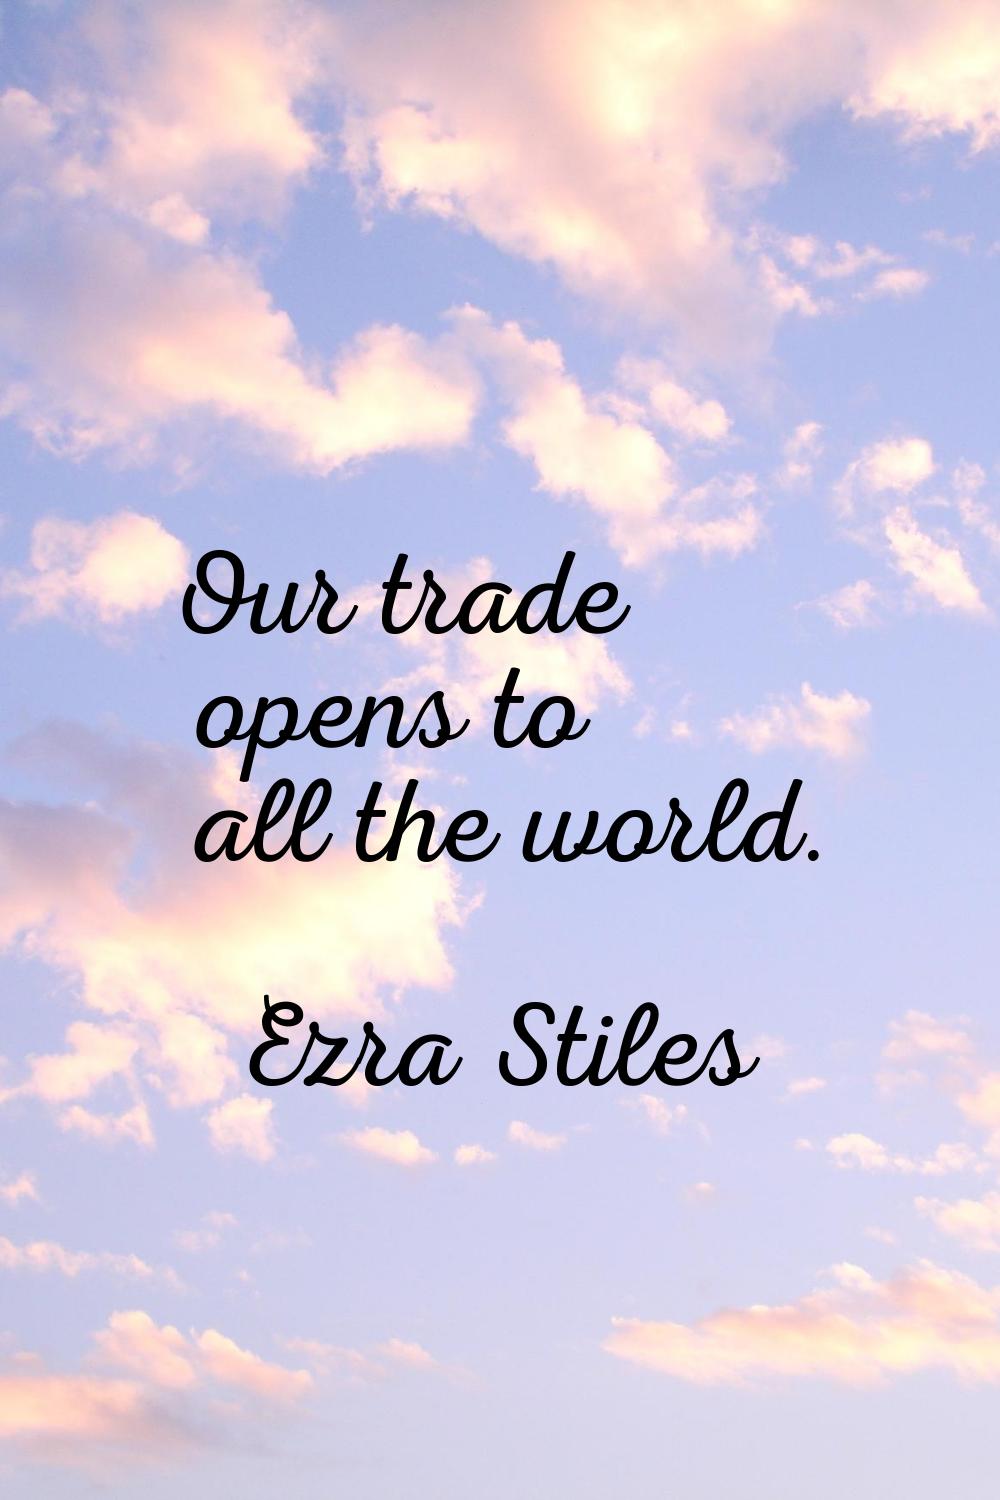 Our trade opens to all the world.